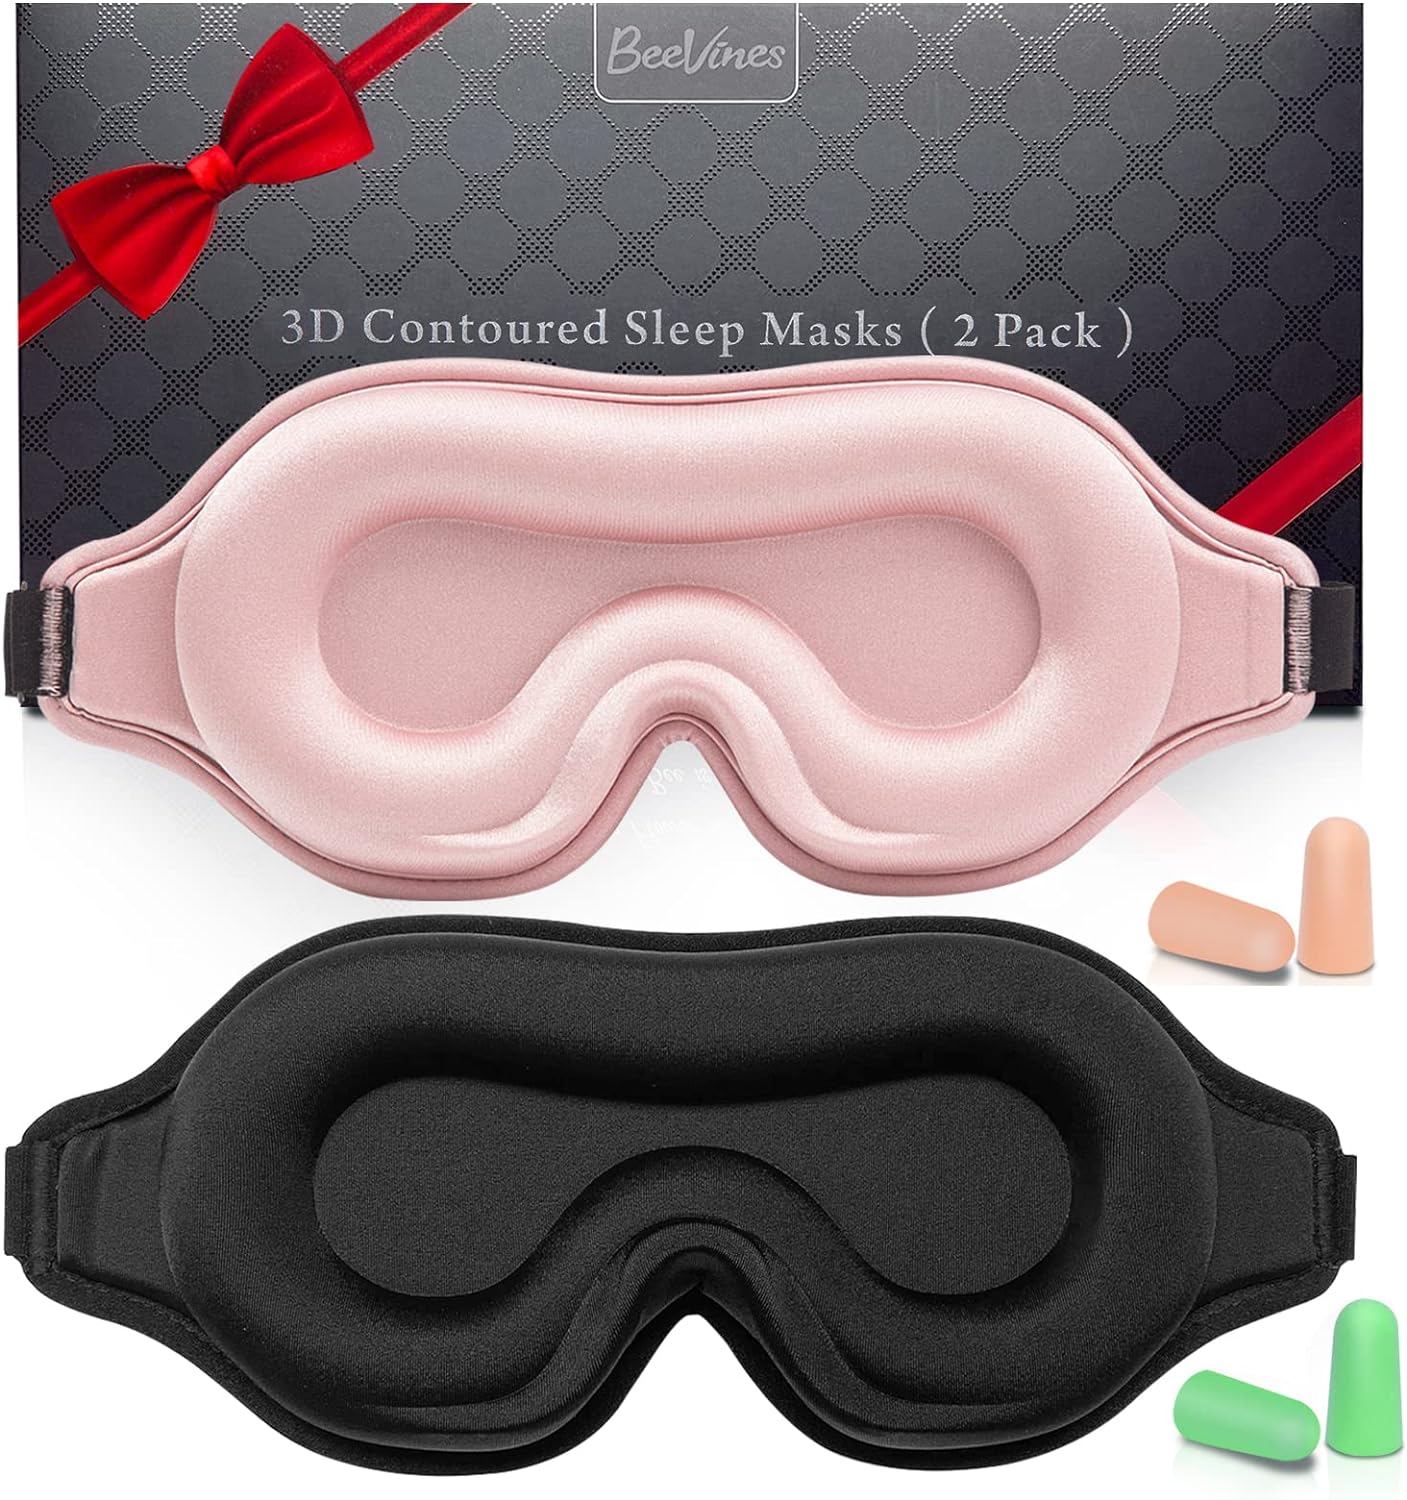 These are really well made. Definitely block out all light. I have lash extensions and was specifically looking for some eye masks that would work with lashes. These are perfect! Adjustable strap, nice material, doesnt slide off. Im a side sleeper and these work perfectly for me. Im also prone to migraines and these are perfect to wear when I need all light blocked. You wont regret buying these.